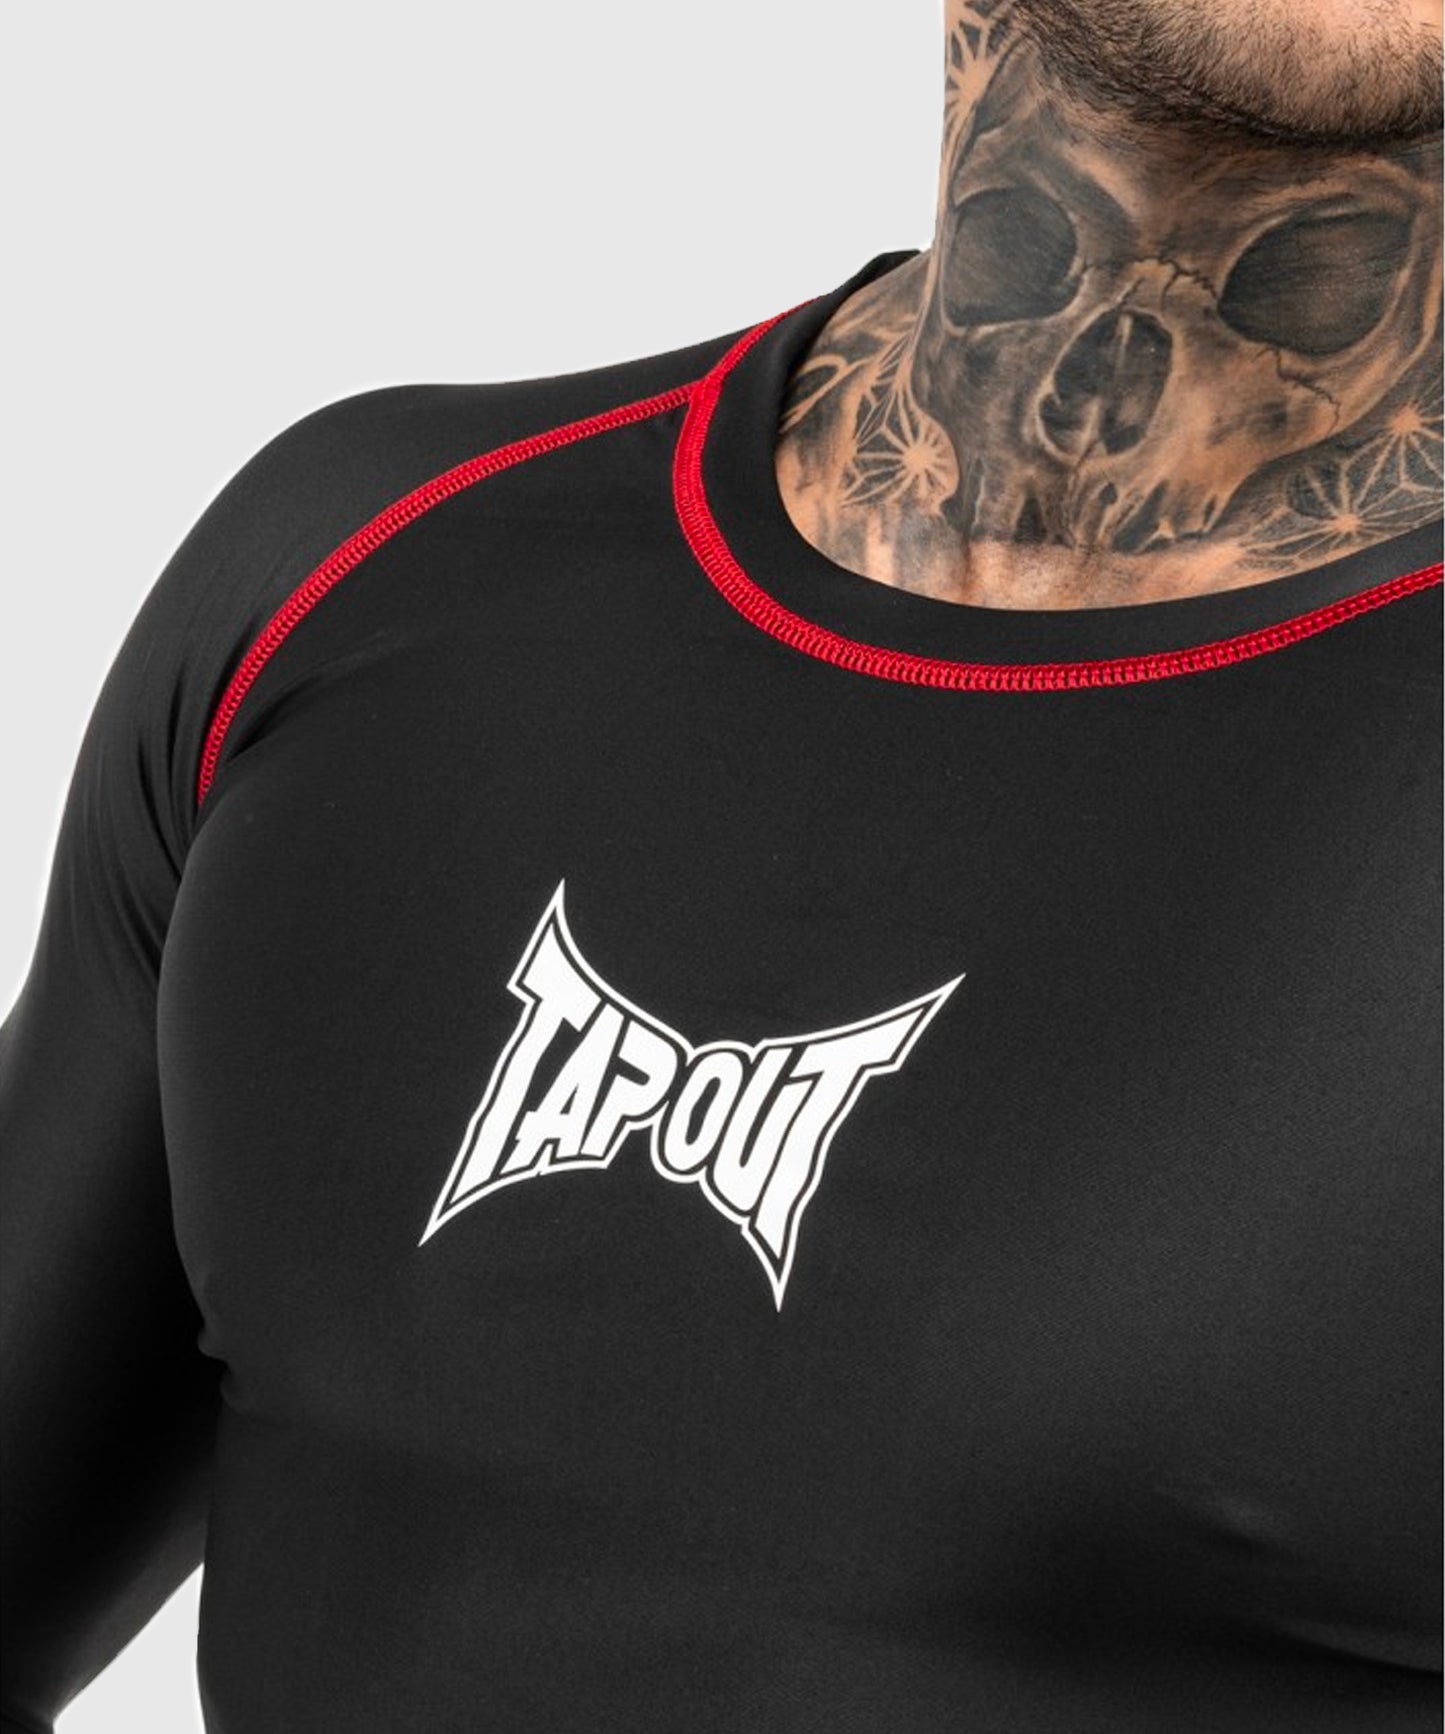 Rashguard Tapout Functional Long Sleeve Slim Fit